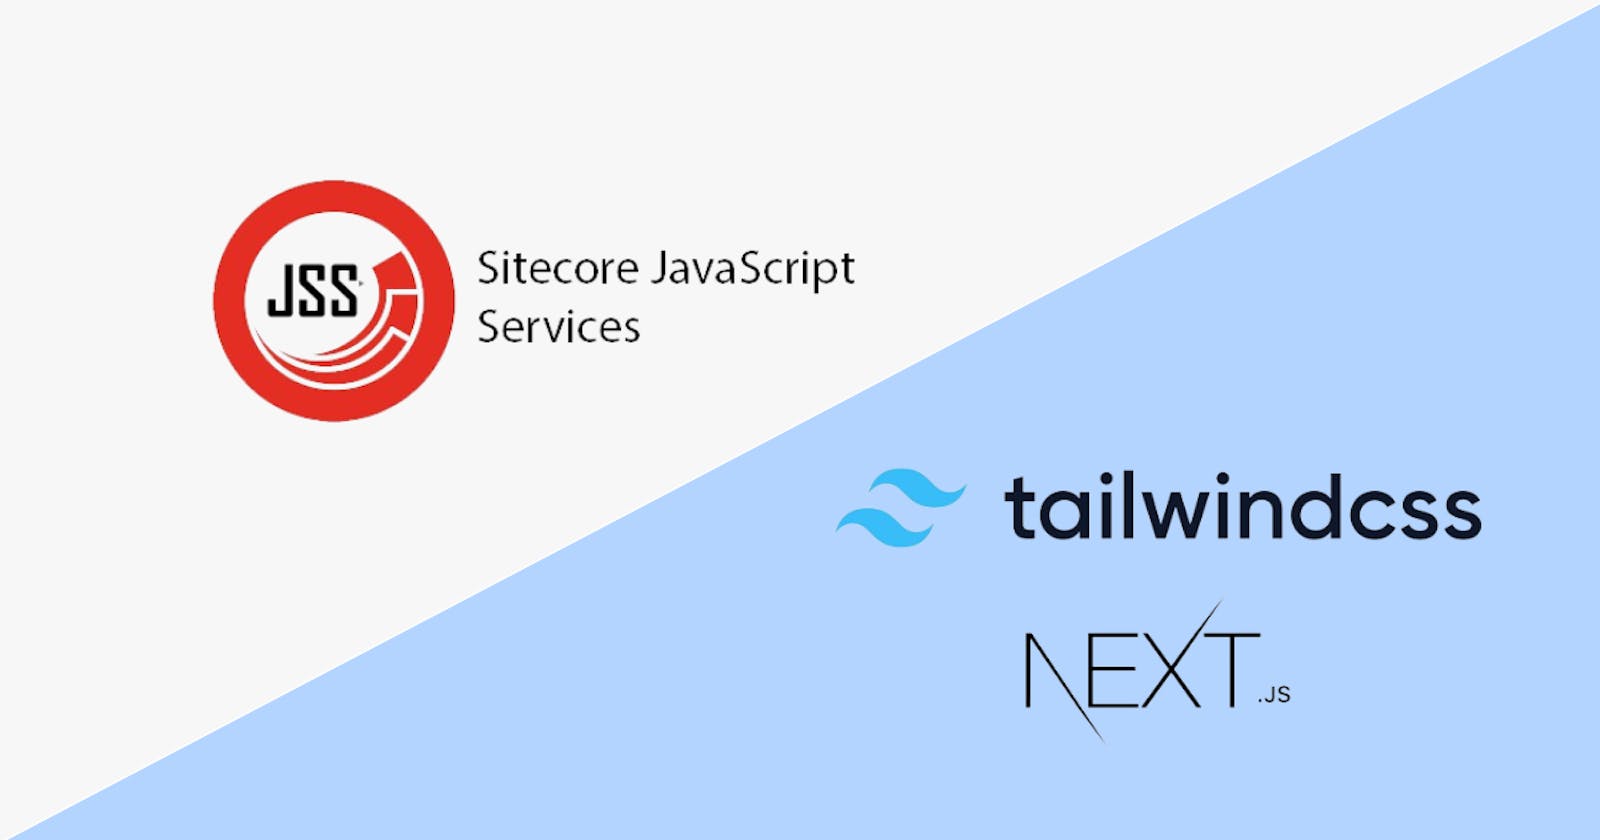 Easily set up multi-theming in Sitecore JSS using Next.js and Tailwind CSS (Part 1)